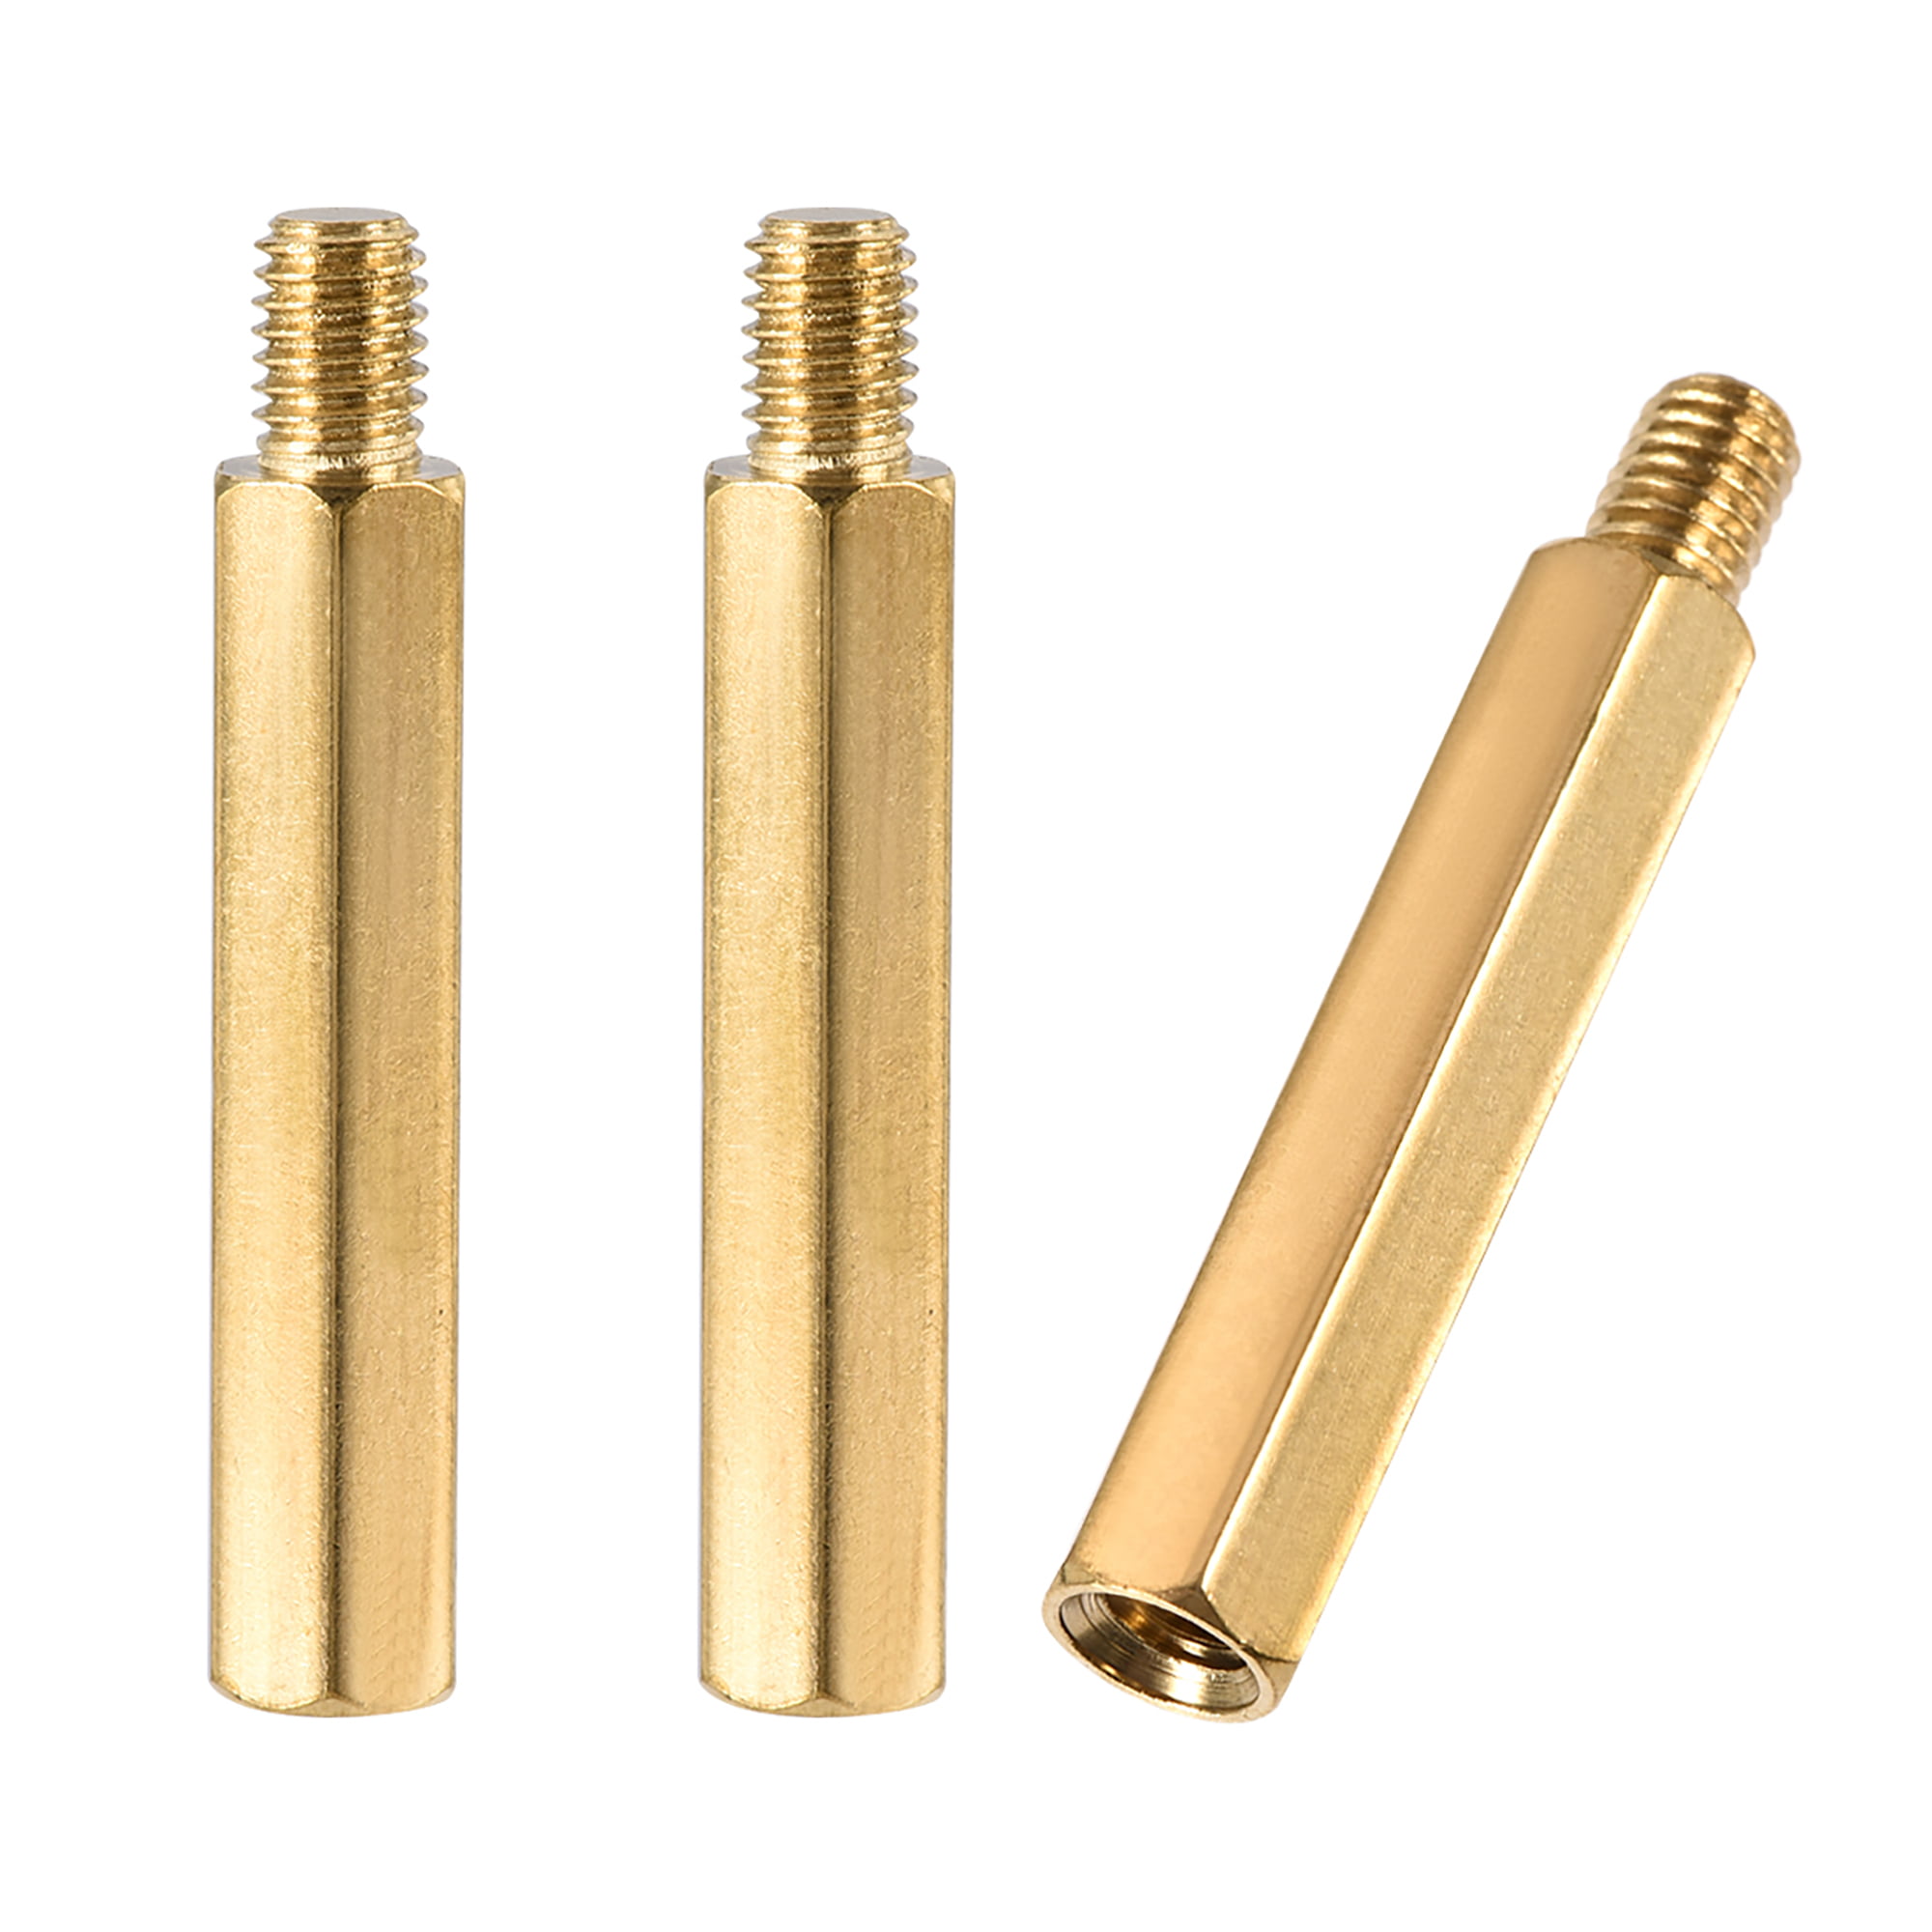 M5 x 60 mm + 7 mm Male to Female Hex Brass Spacer Standoff 3pcs